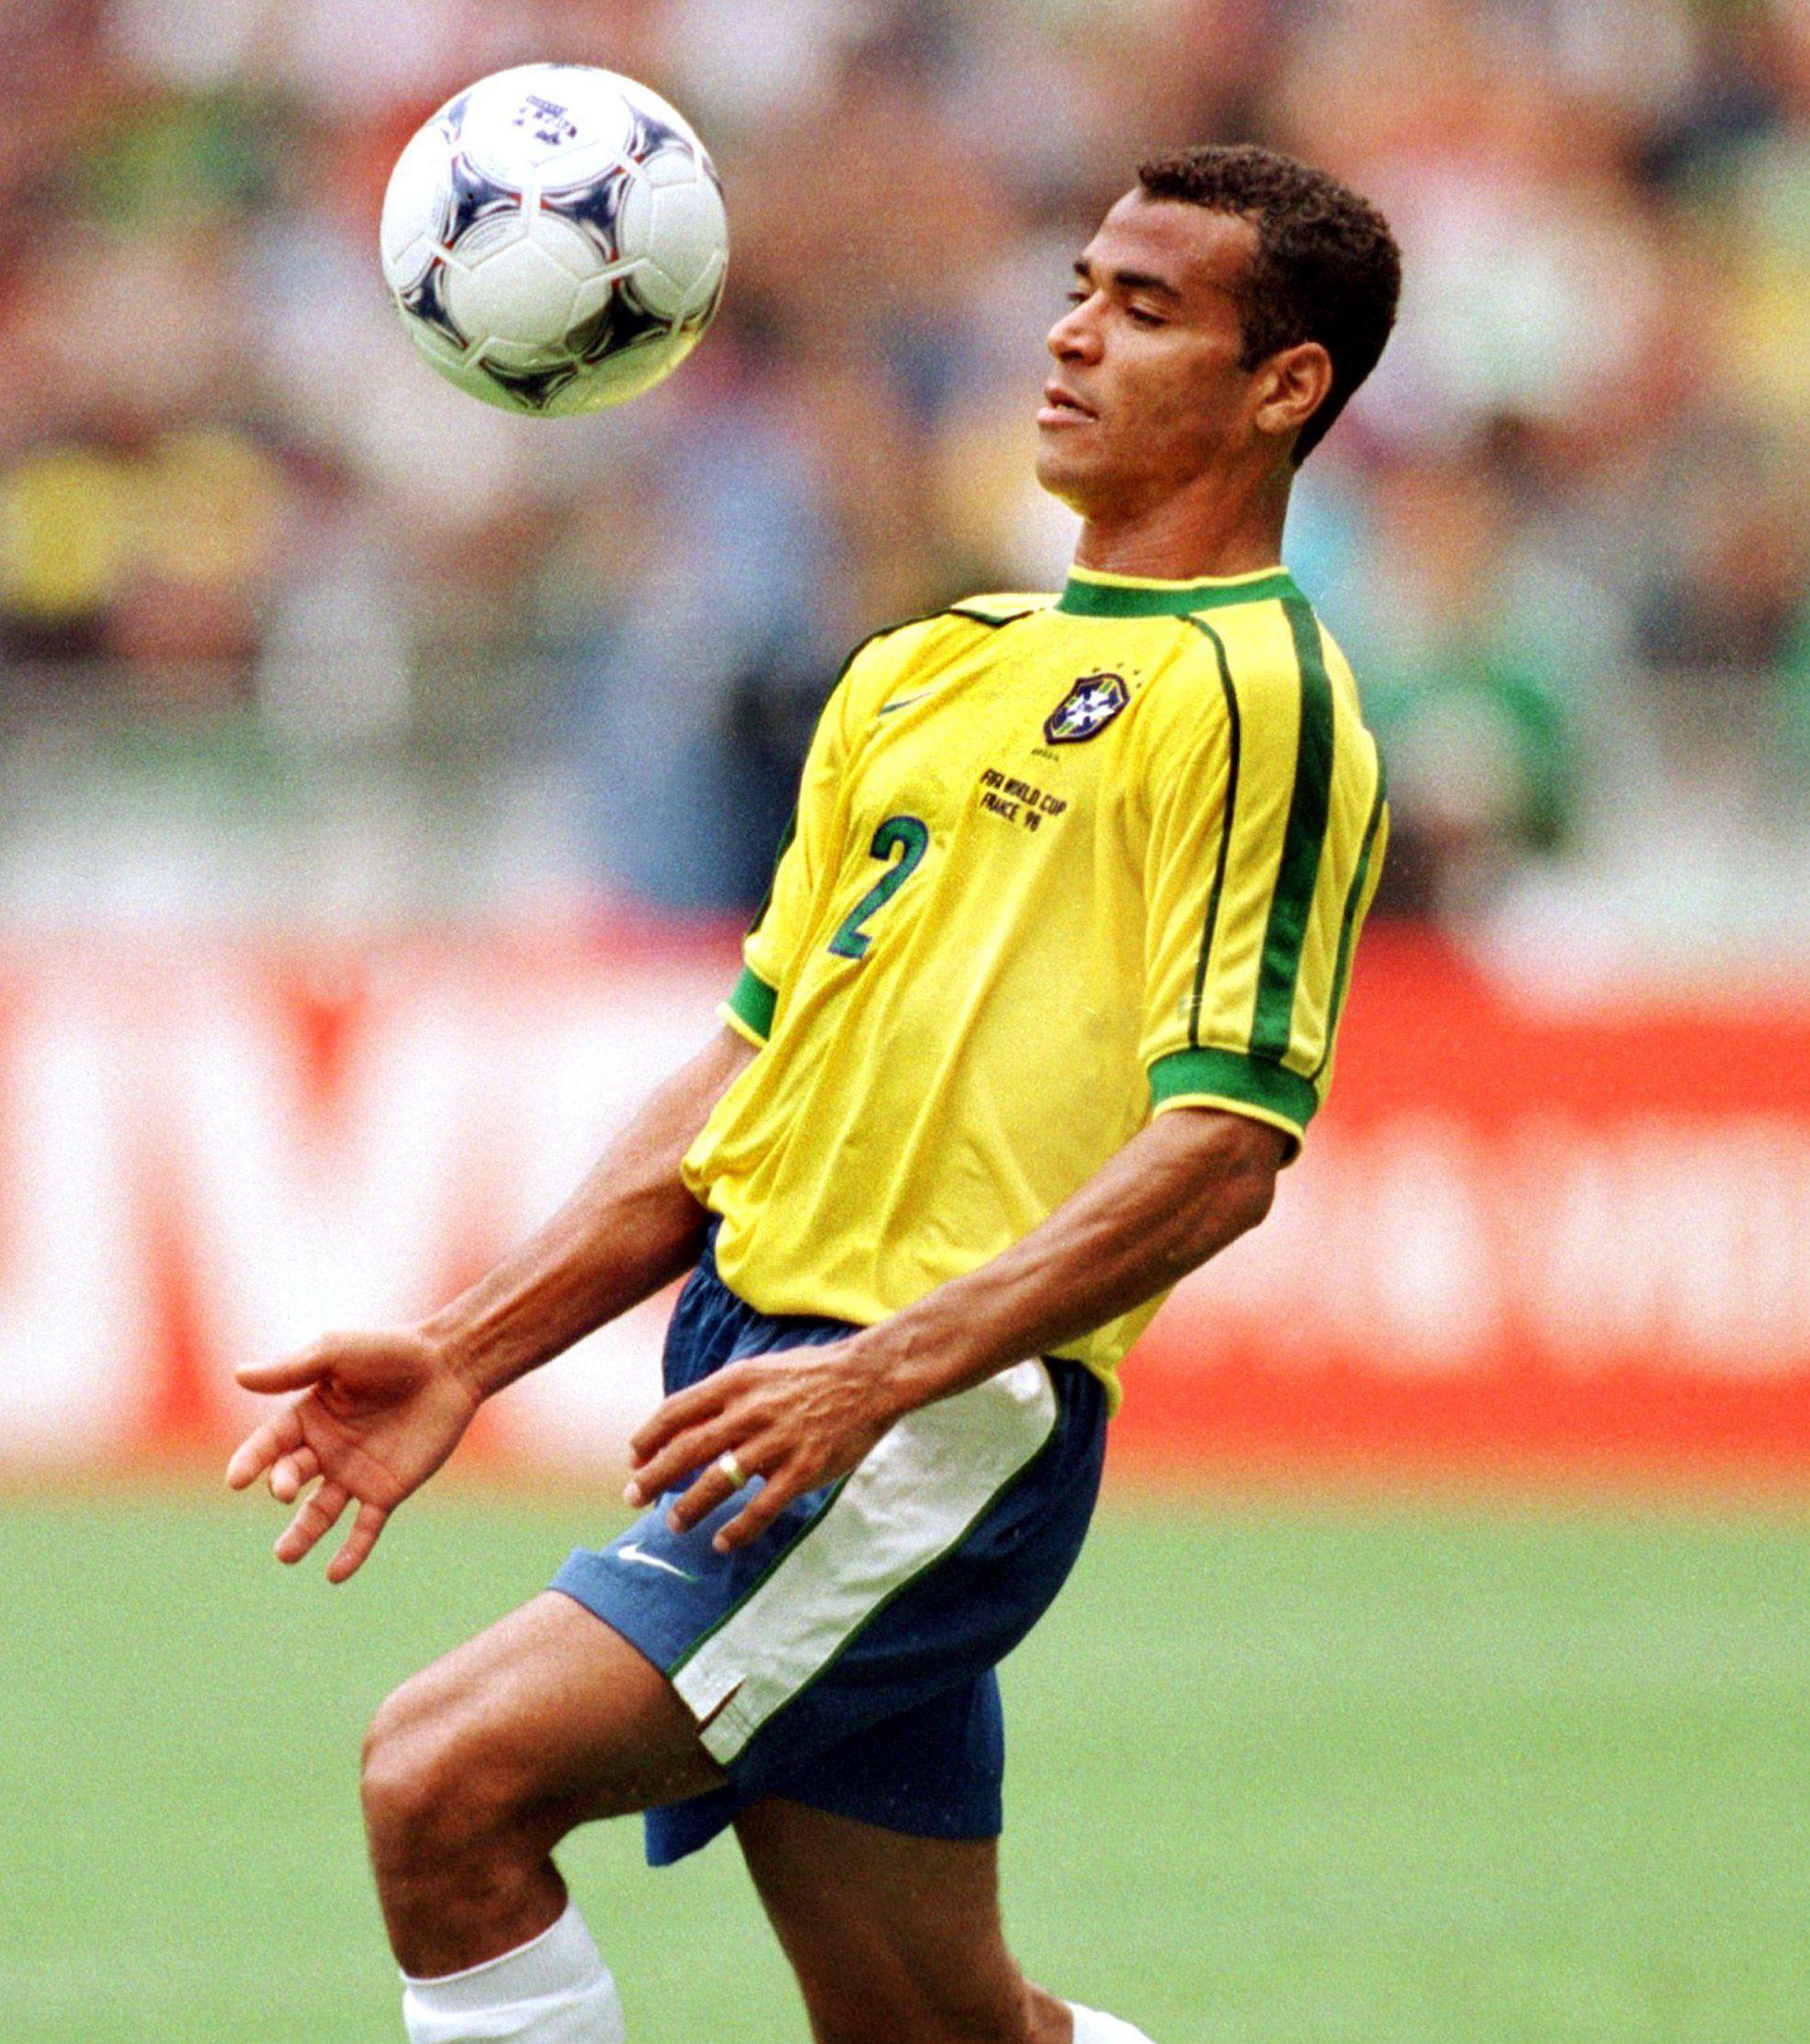 Cafu = The Best Right Back Ever! (just My View)